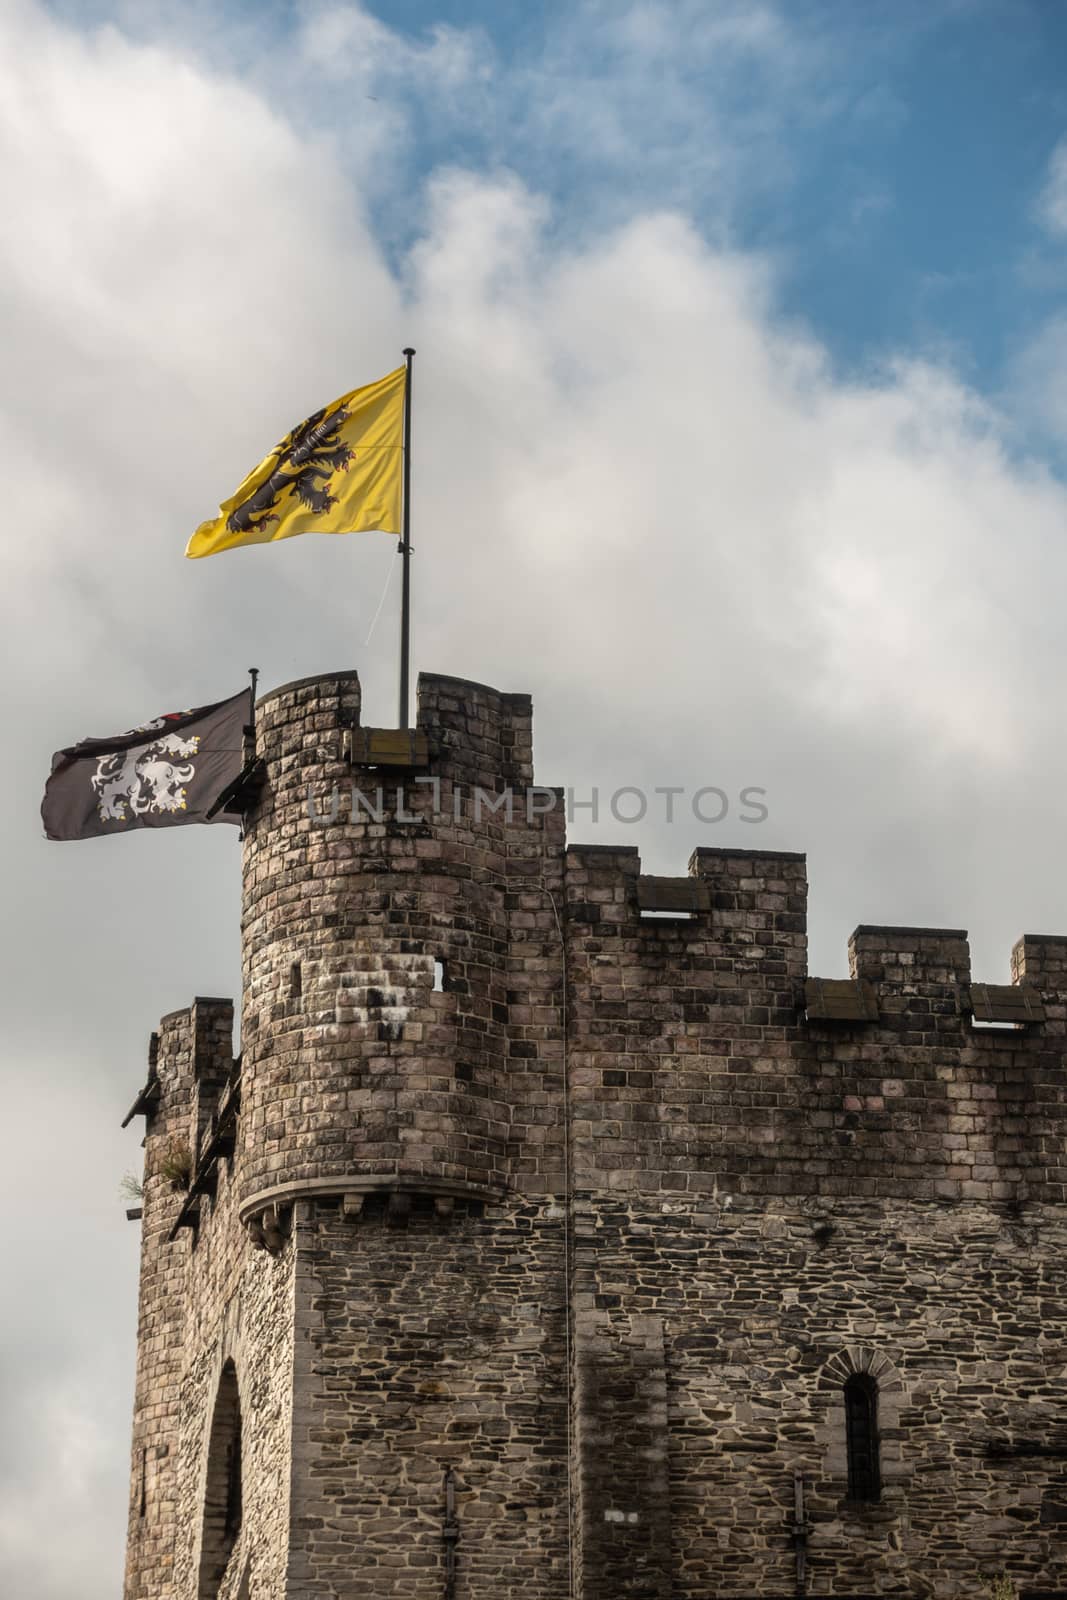 Ghent, Belgium - September 23, 2018: Top of Central gray stone tower of the Castle of Gent. Flag of Flanders and of Ghent on top. Blue sky with white clouds.